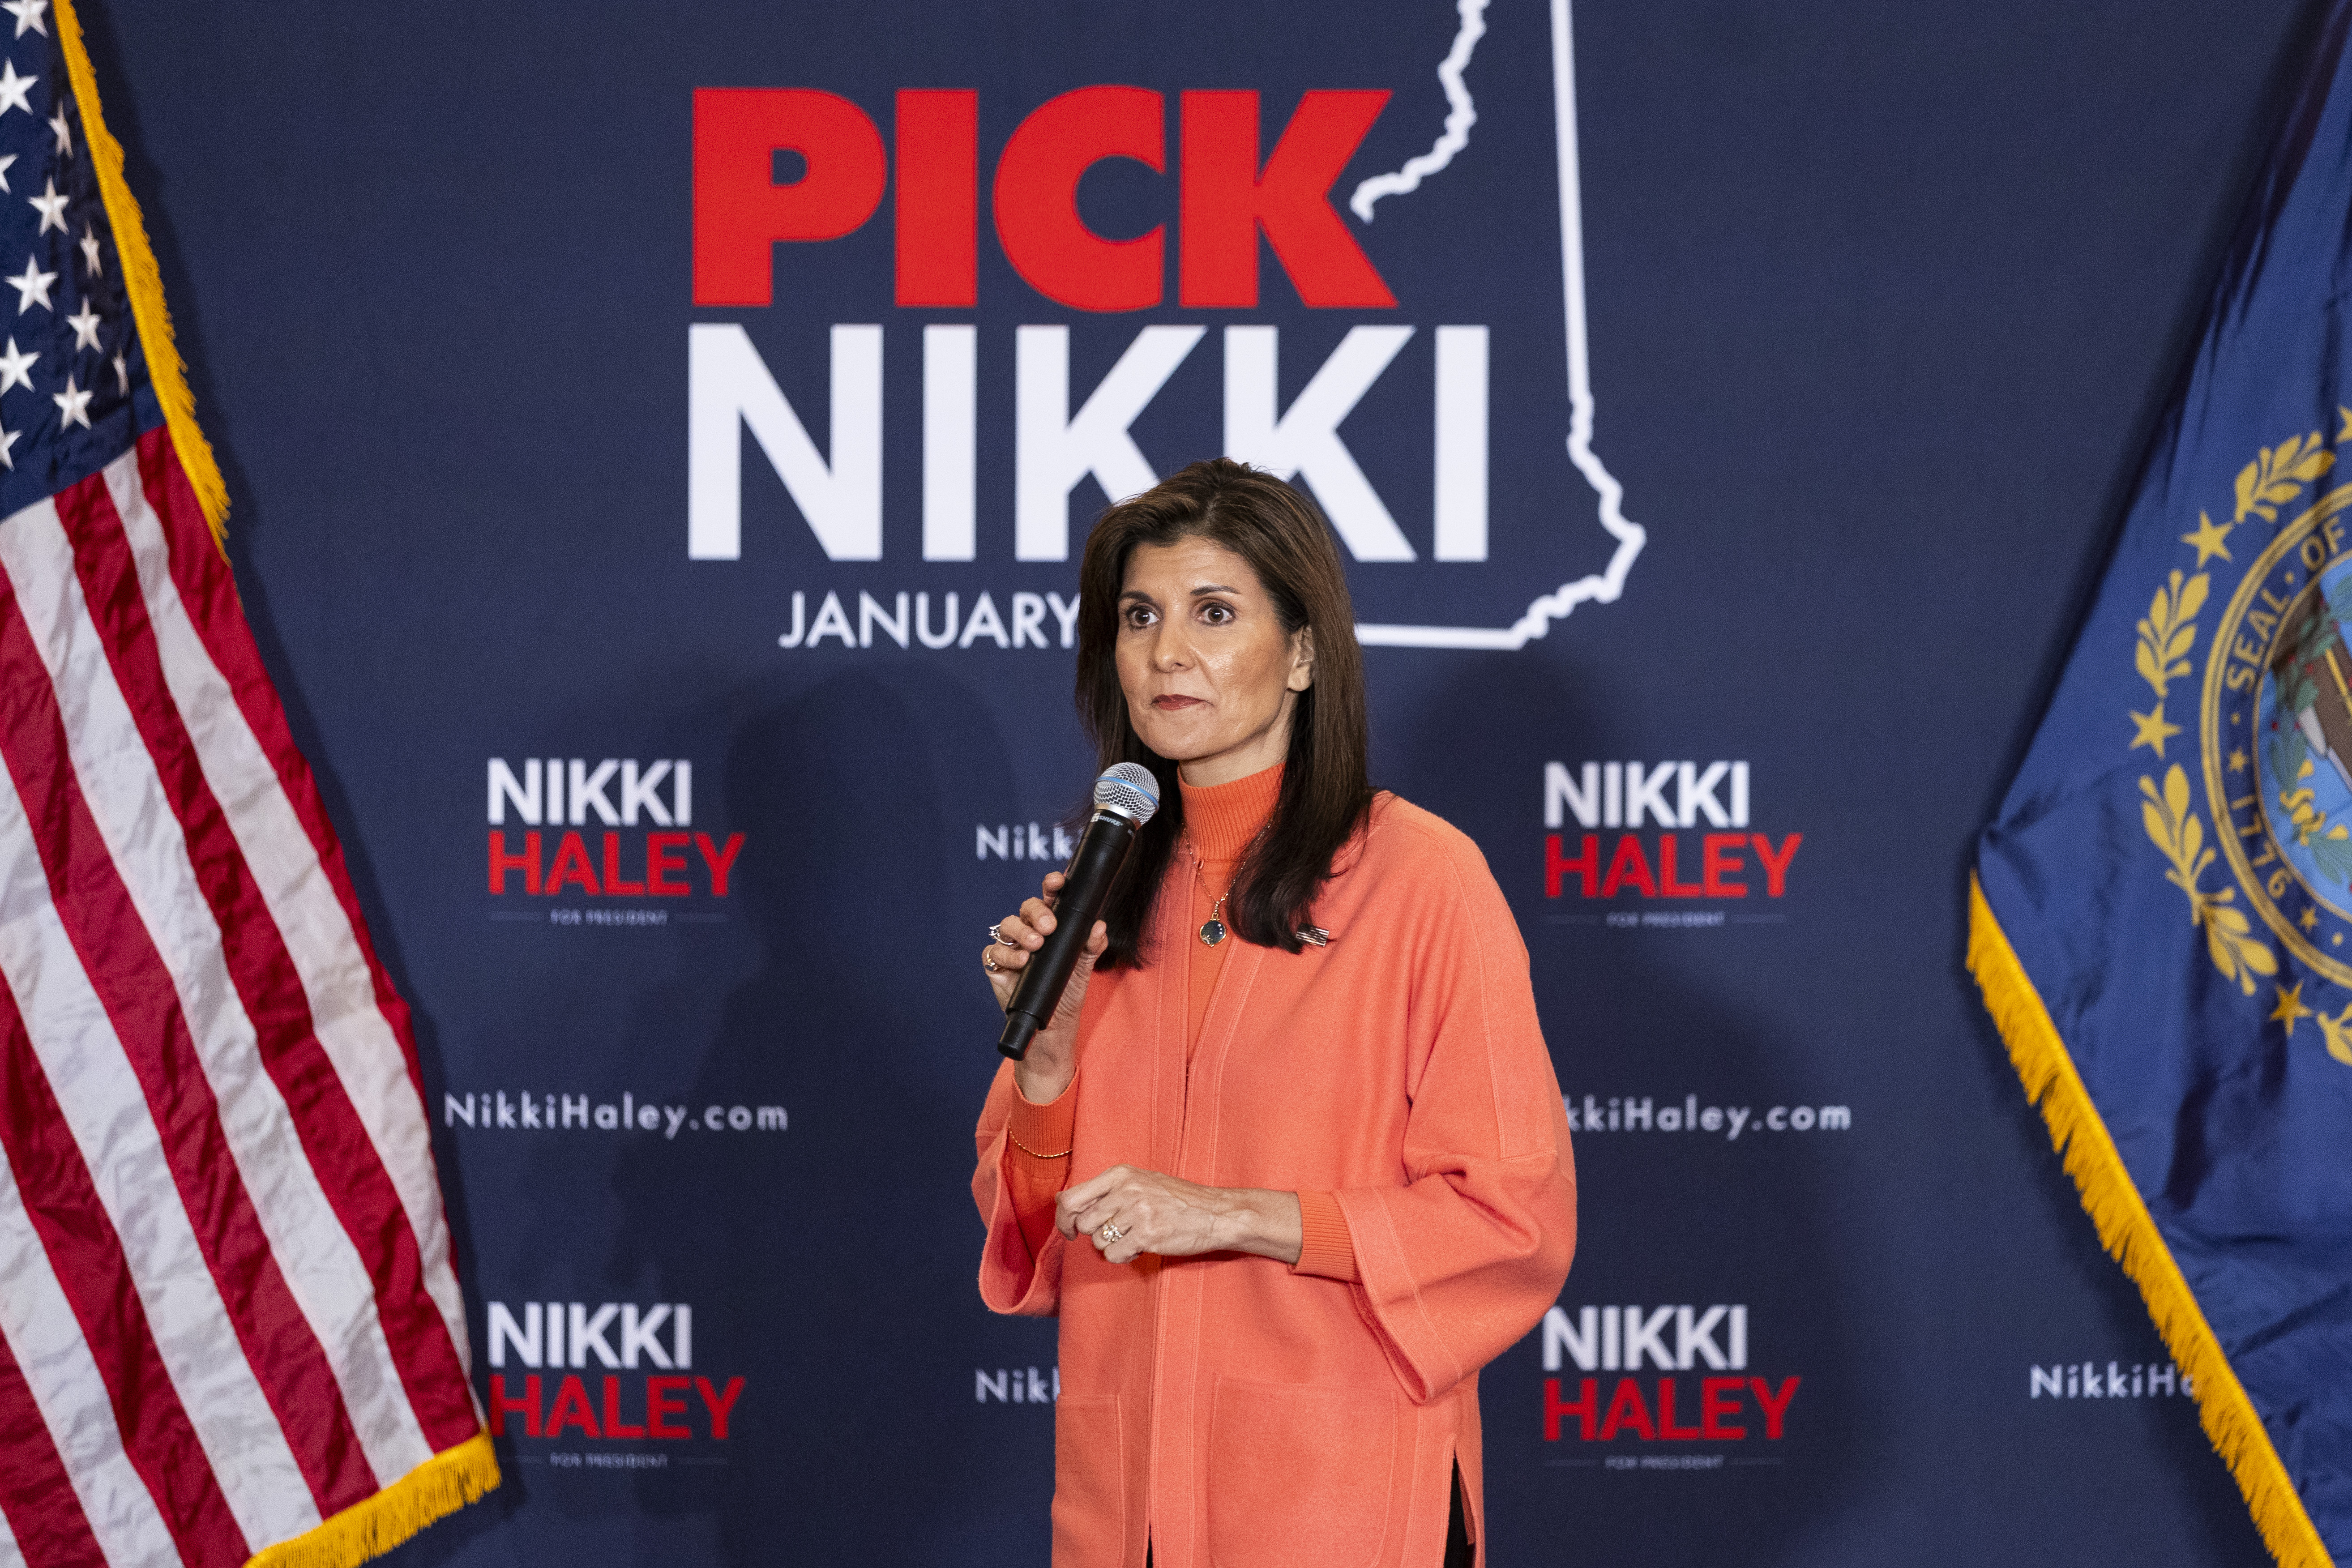 Former South Carolina Gov. Nikki Haley holds a campaign event in Bretton Woods, New Hampshire, on January 16.